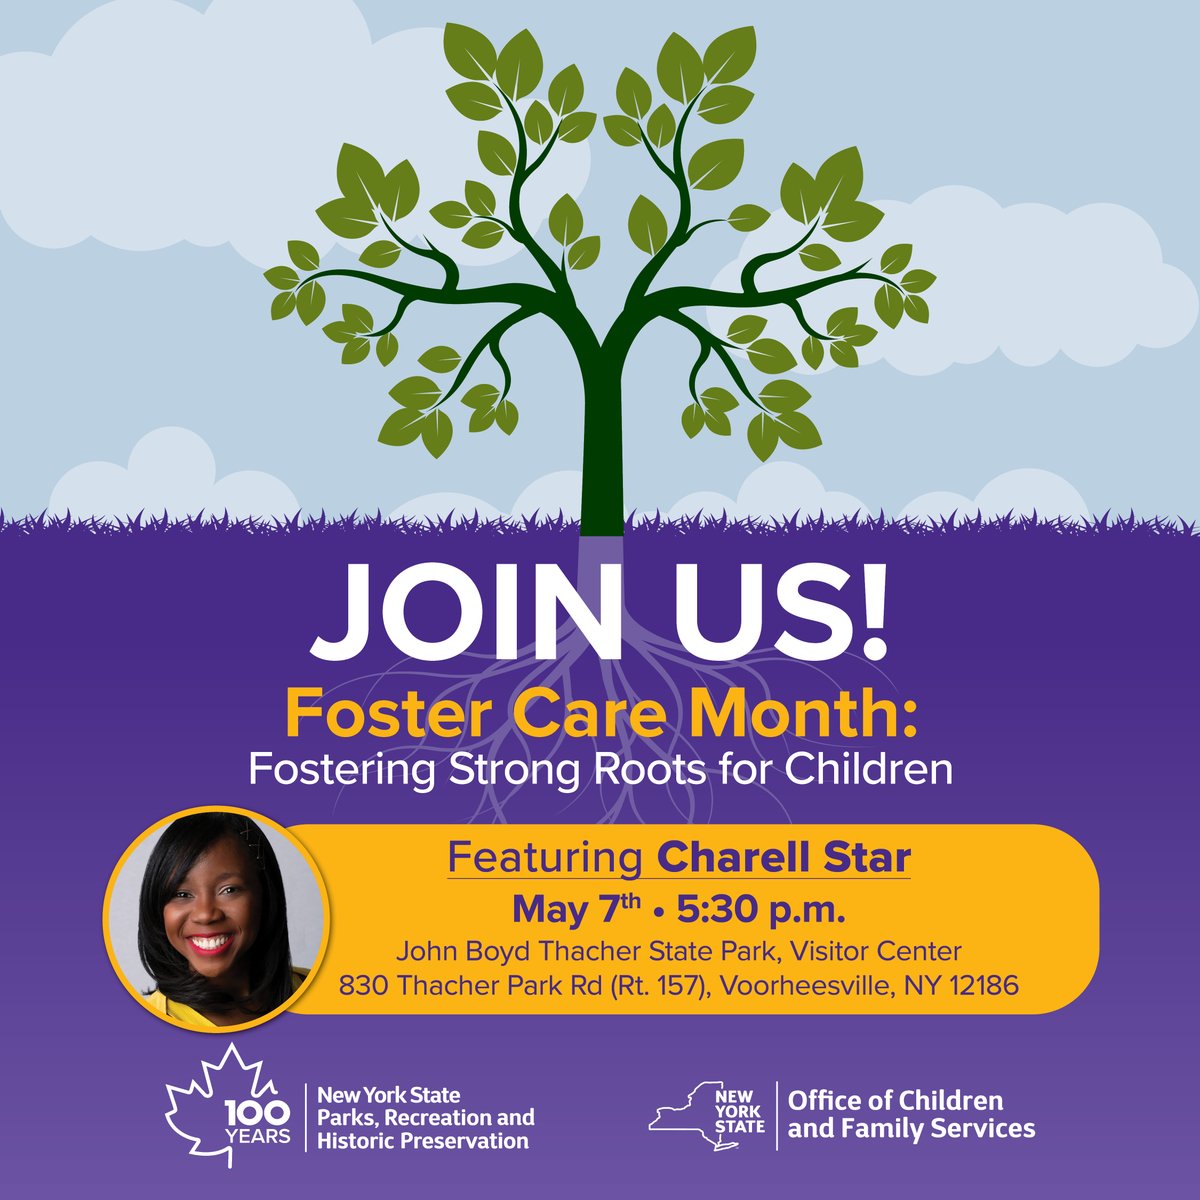 Join us tonight to learn about the power of foster and kinship families and how you can foster strong roots for #NewYork children and youth.
If you can’t attend in person, you can watch the live stream on our YouTube account: ow.ly/wj4w50RyNTm